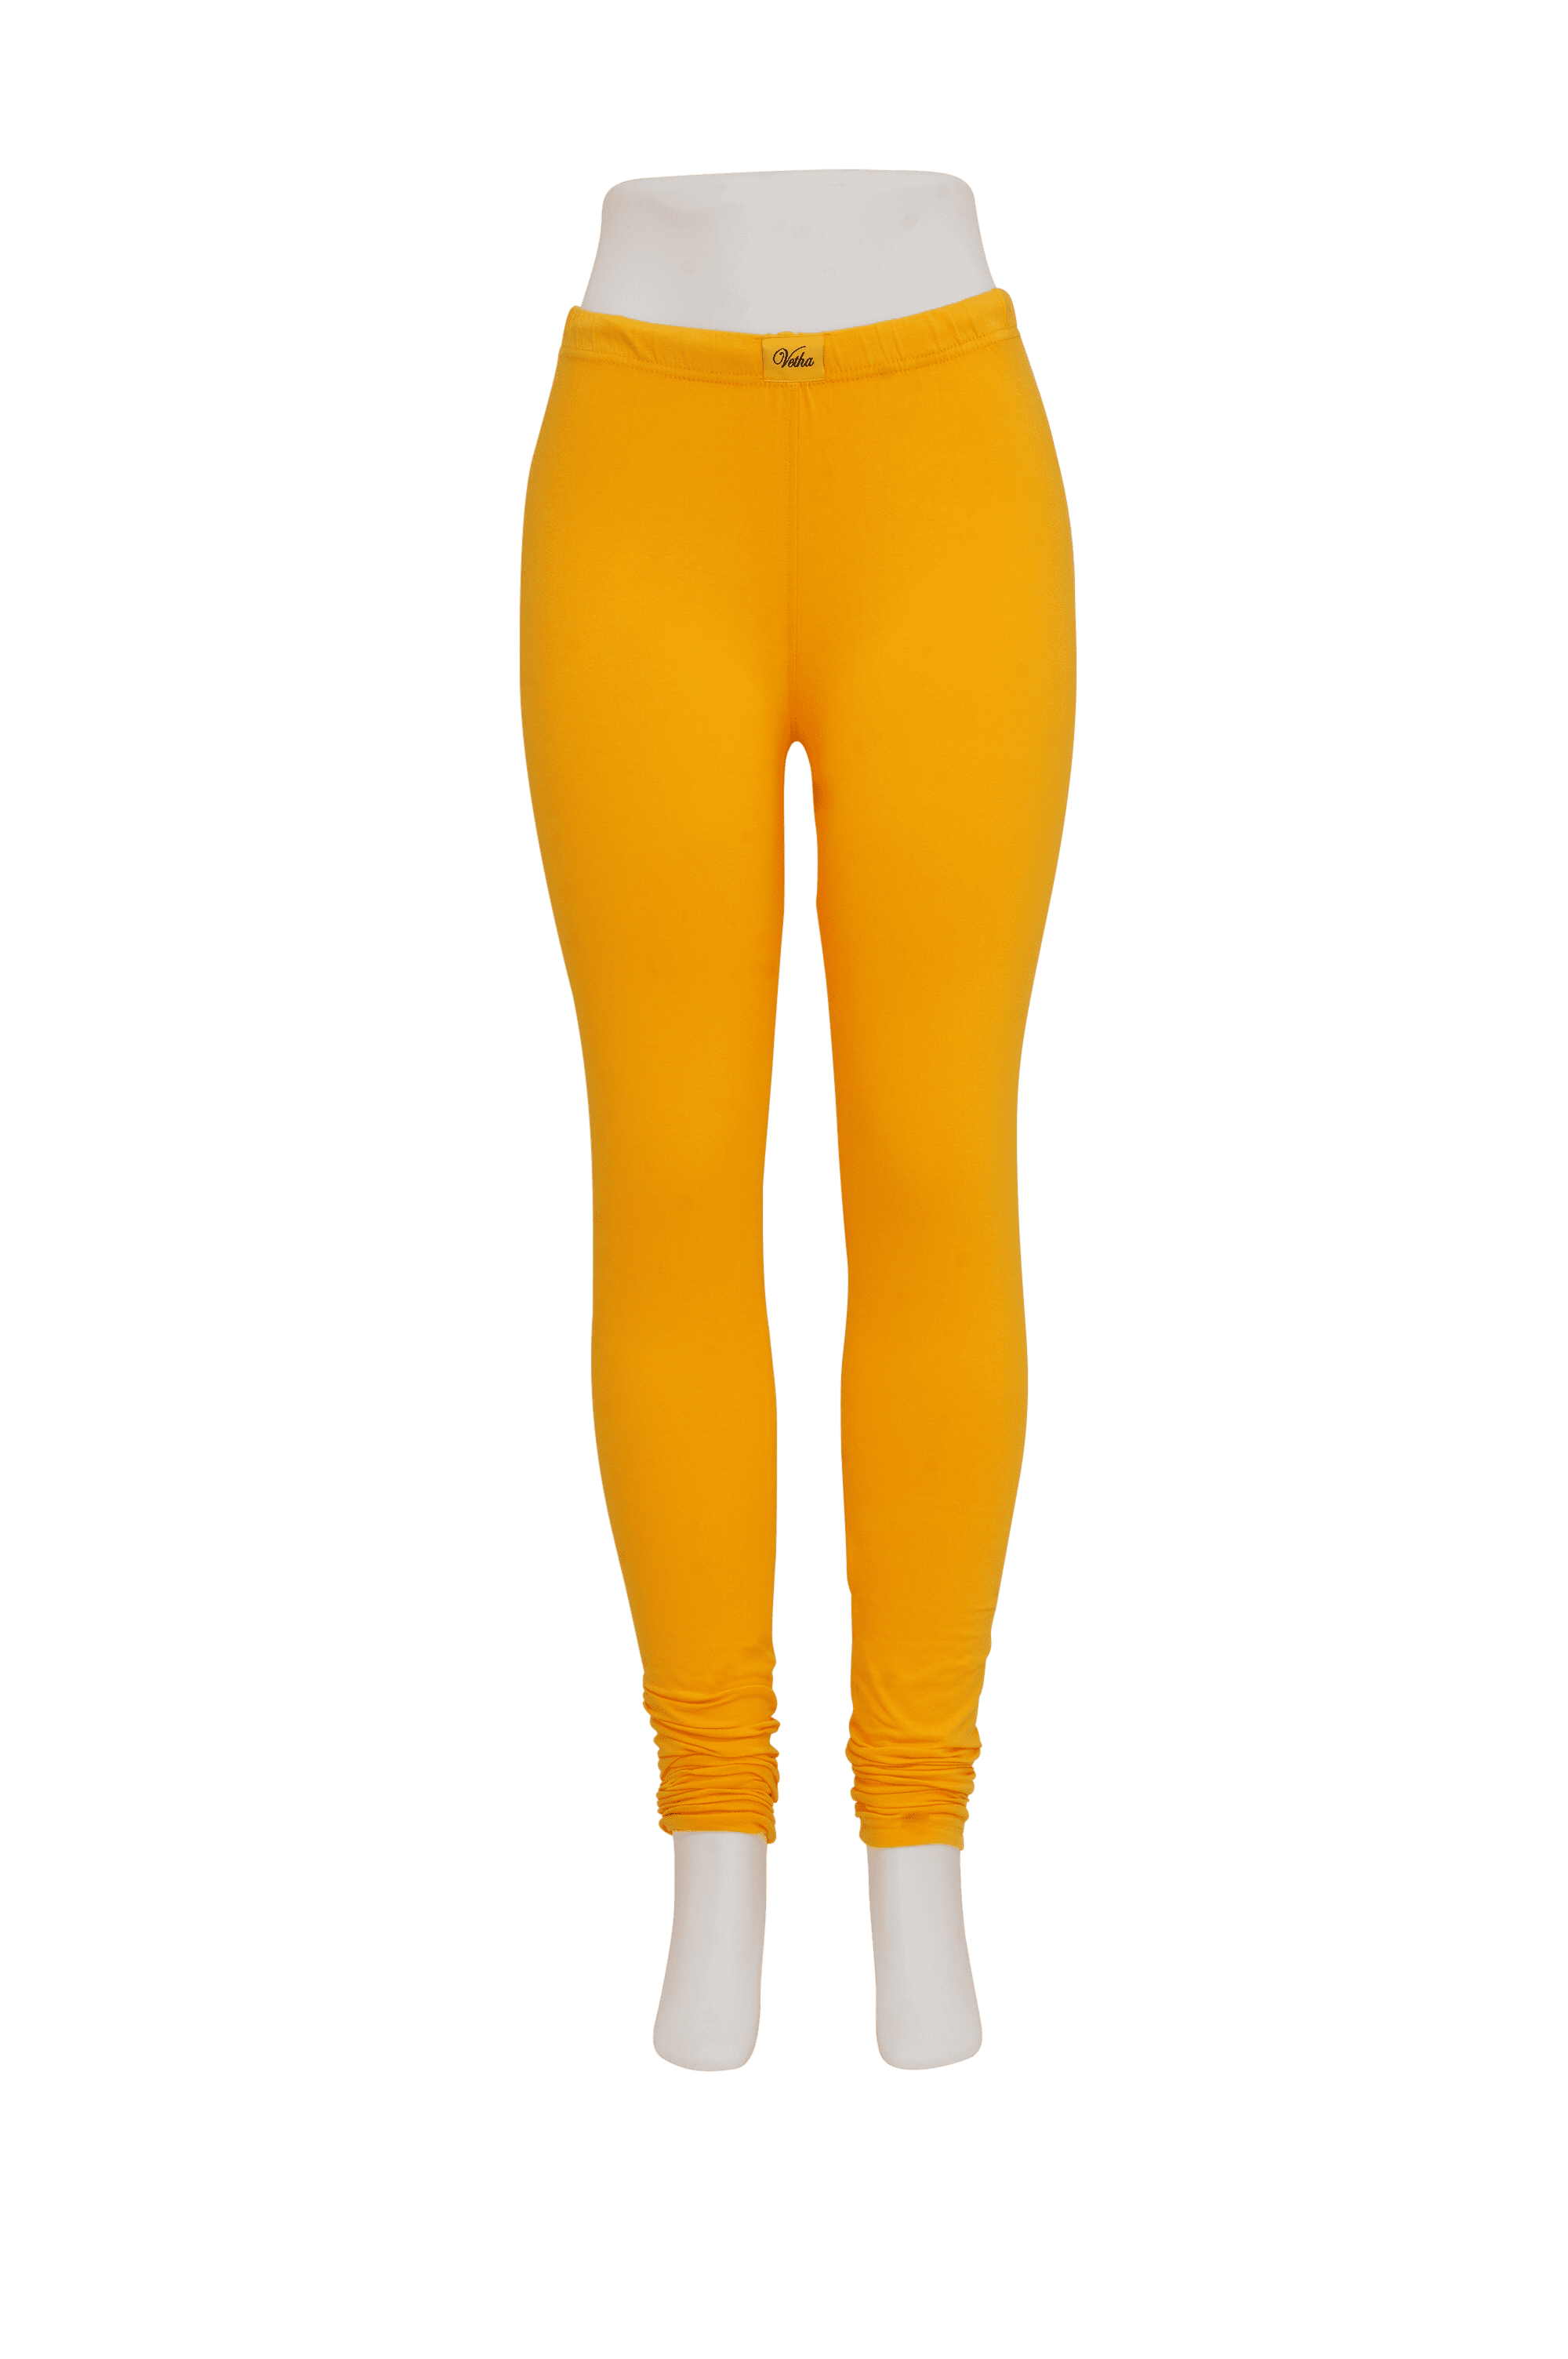 Yellow High Waist Ethnic Wear Cotton Legging, Slim Fit at Rs 210 in Tiruppur